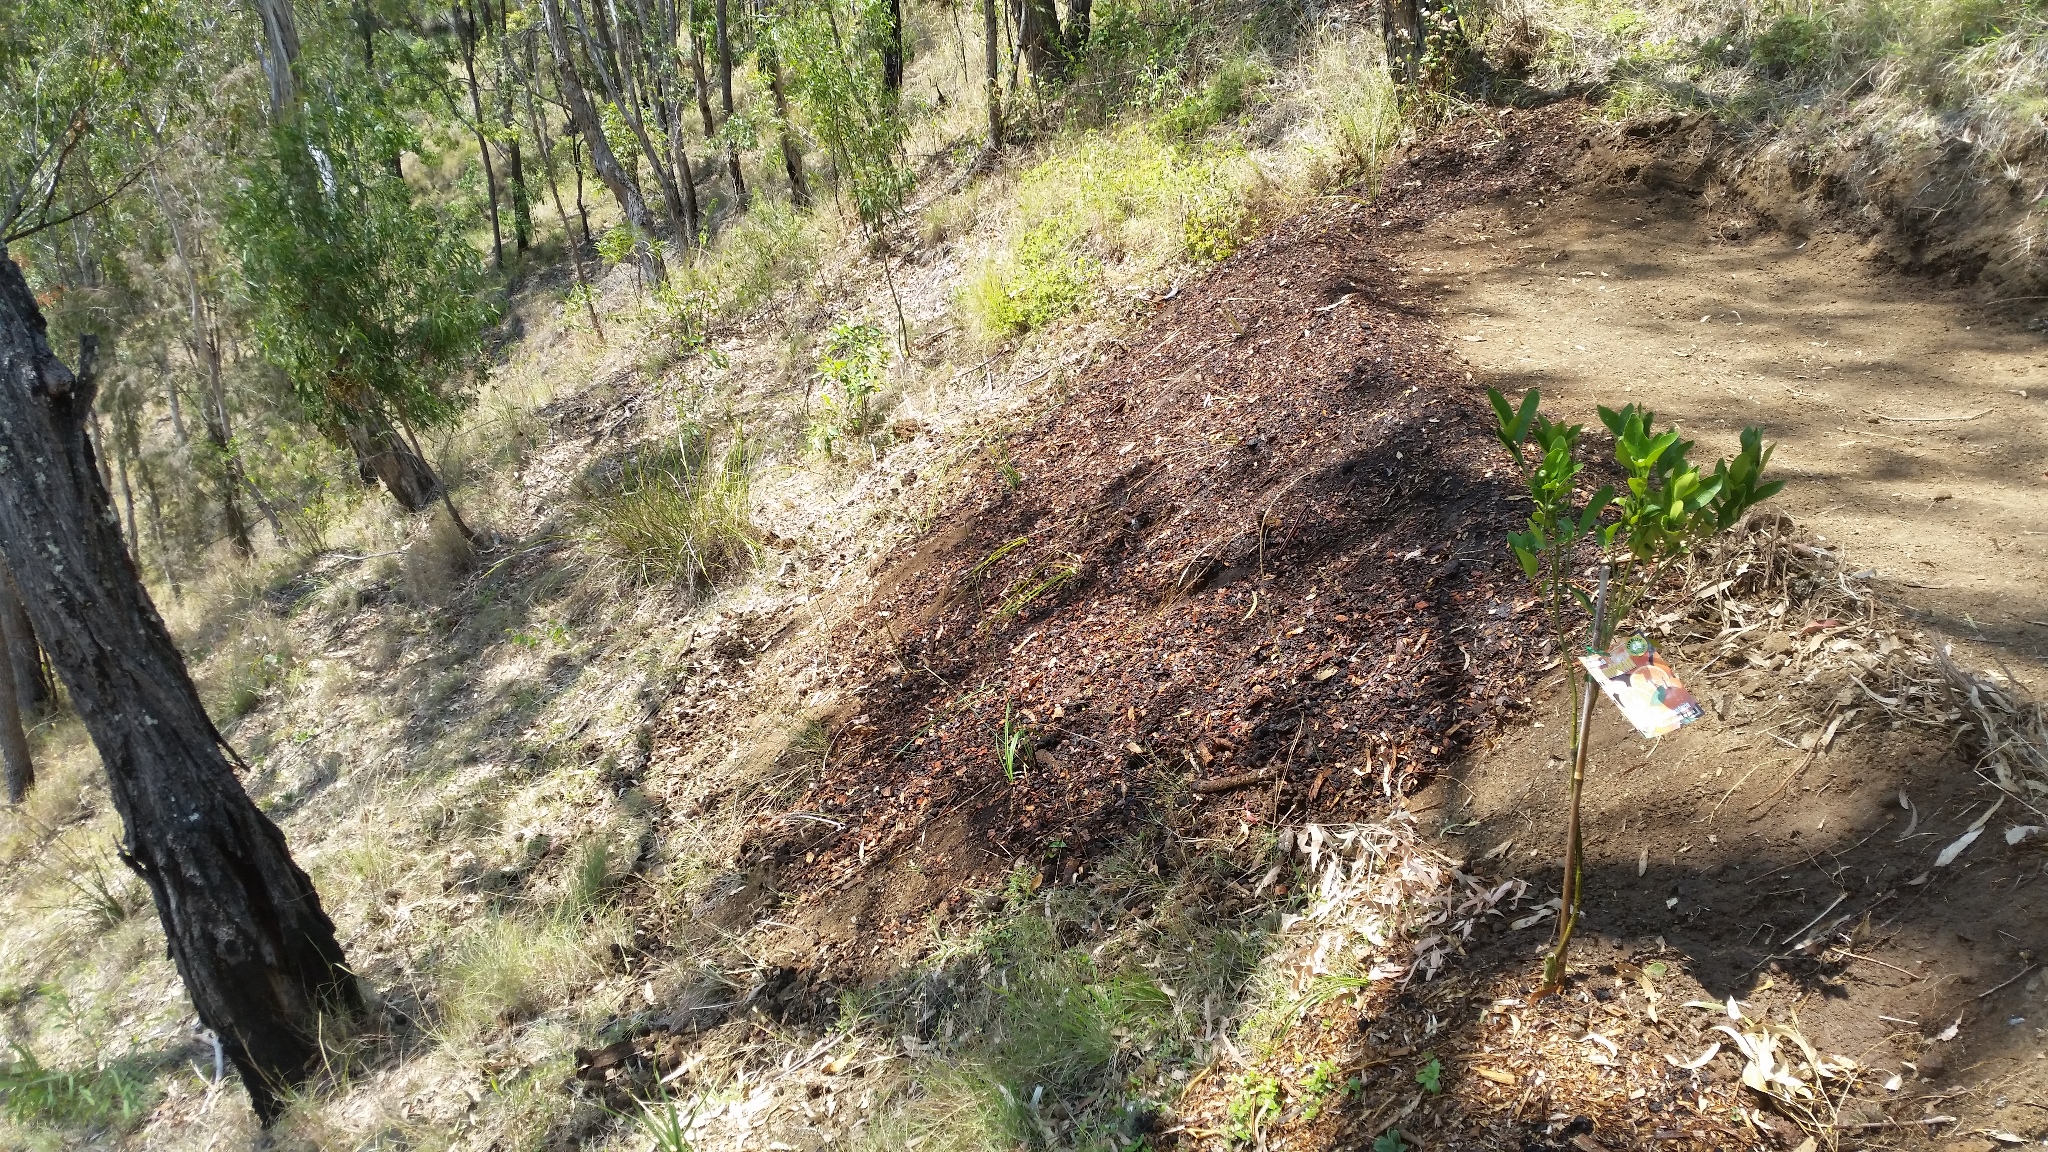 North Face bank - Planting completed